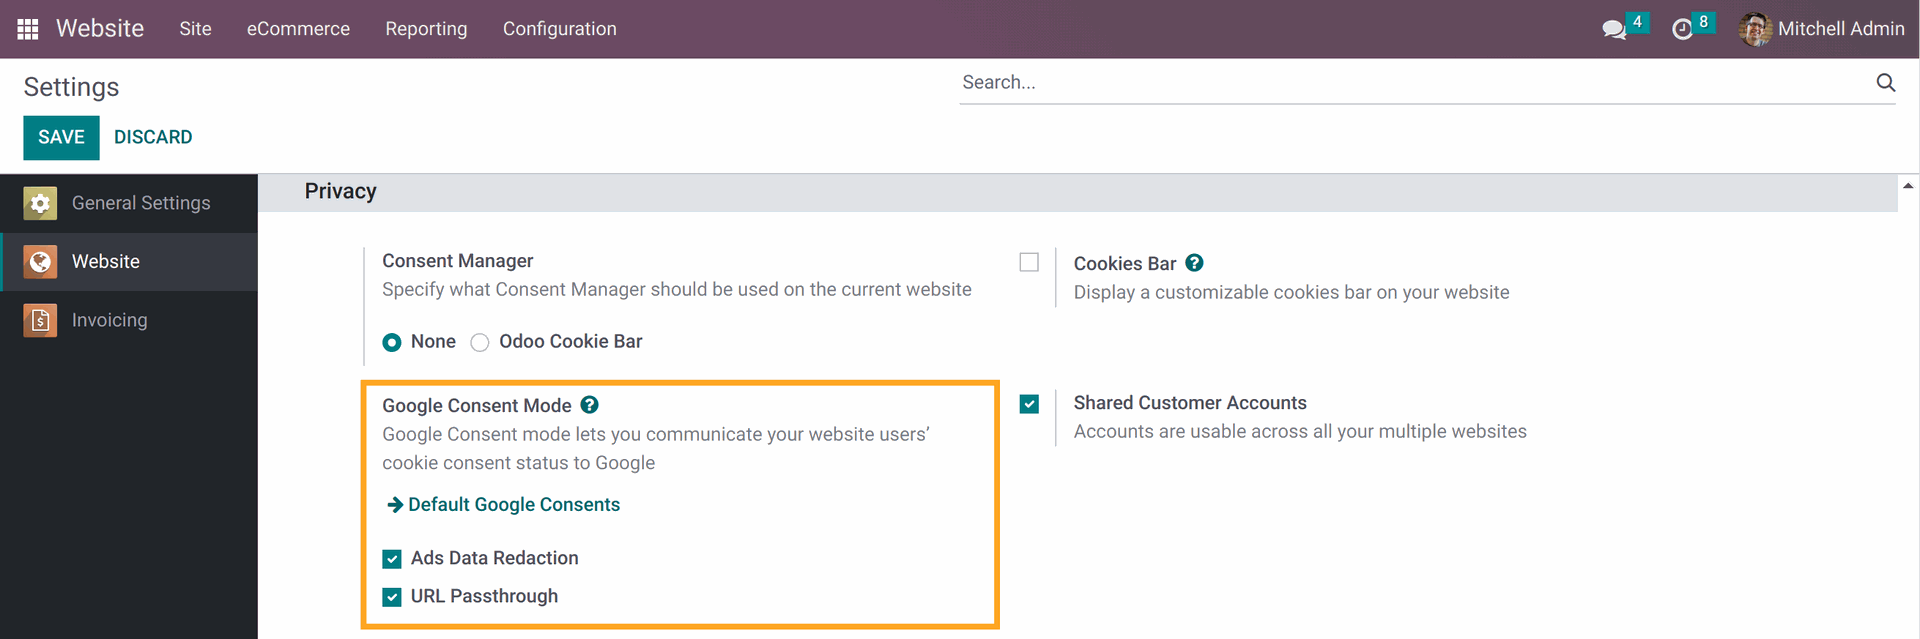 Google Consent Mode setting in Odoo 16.0